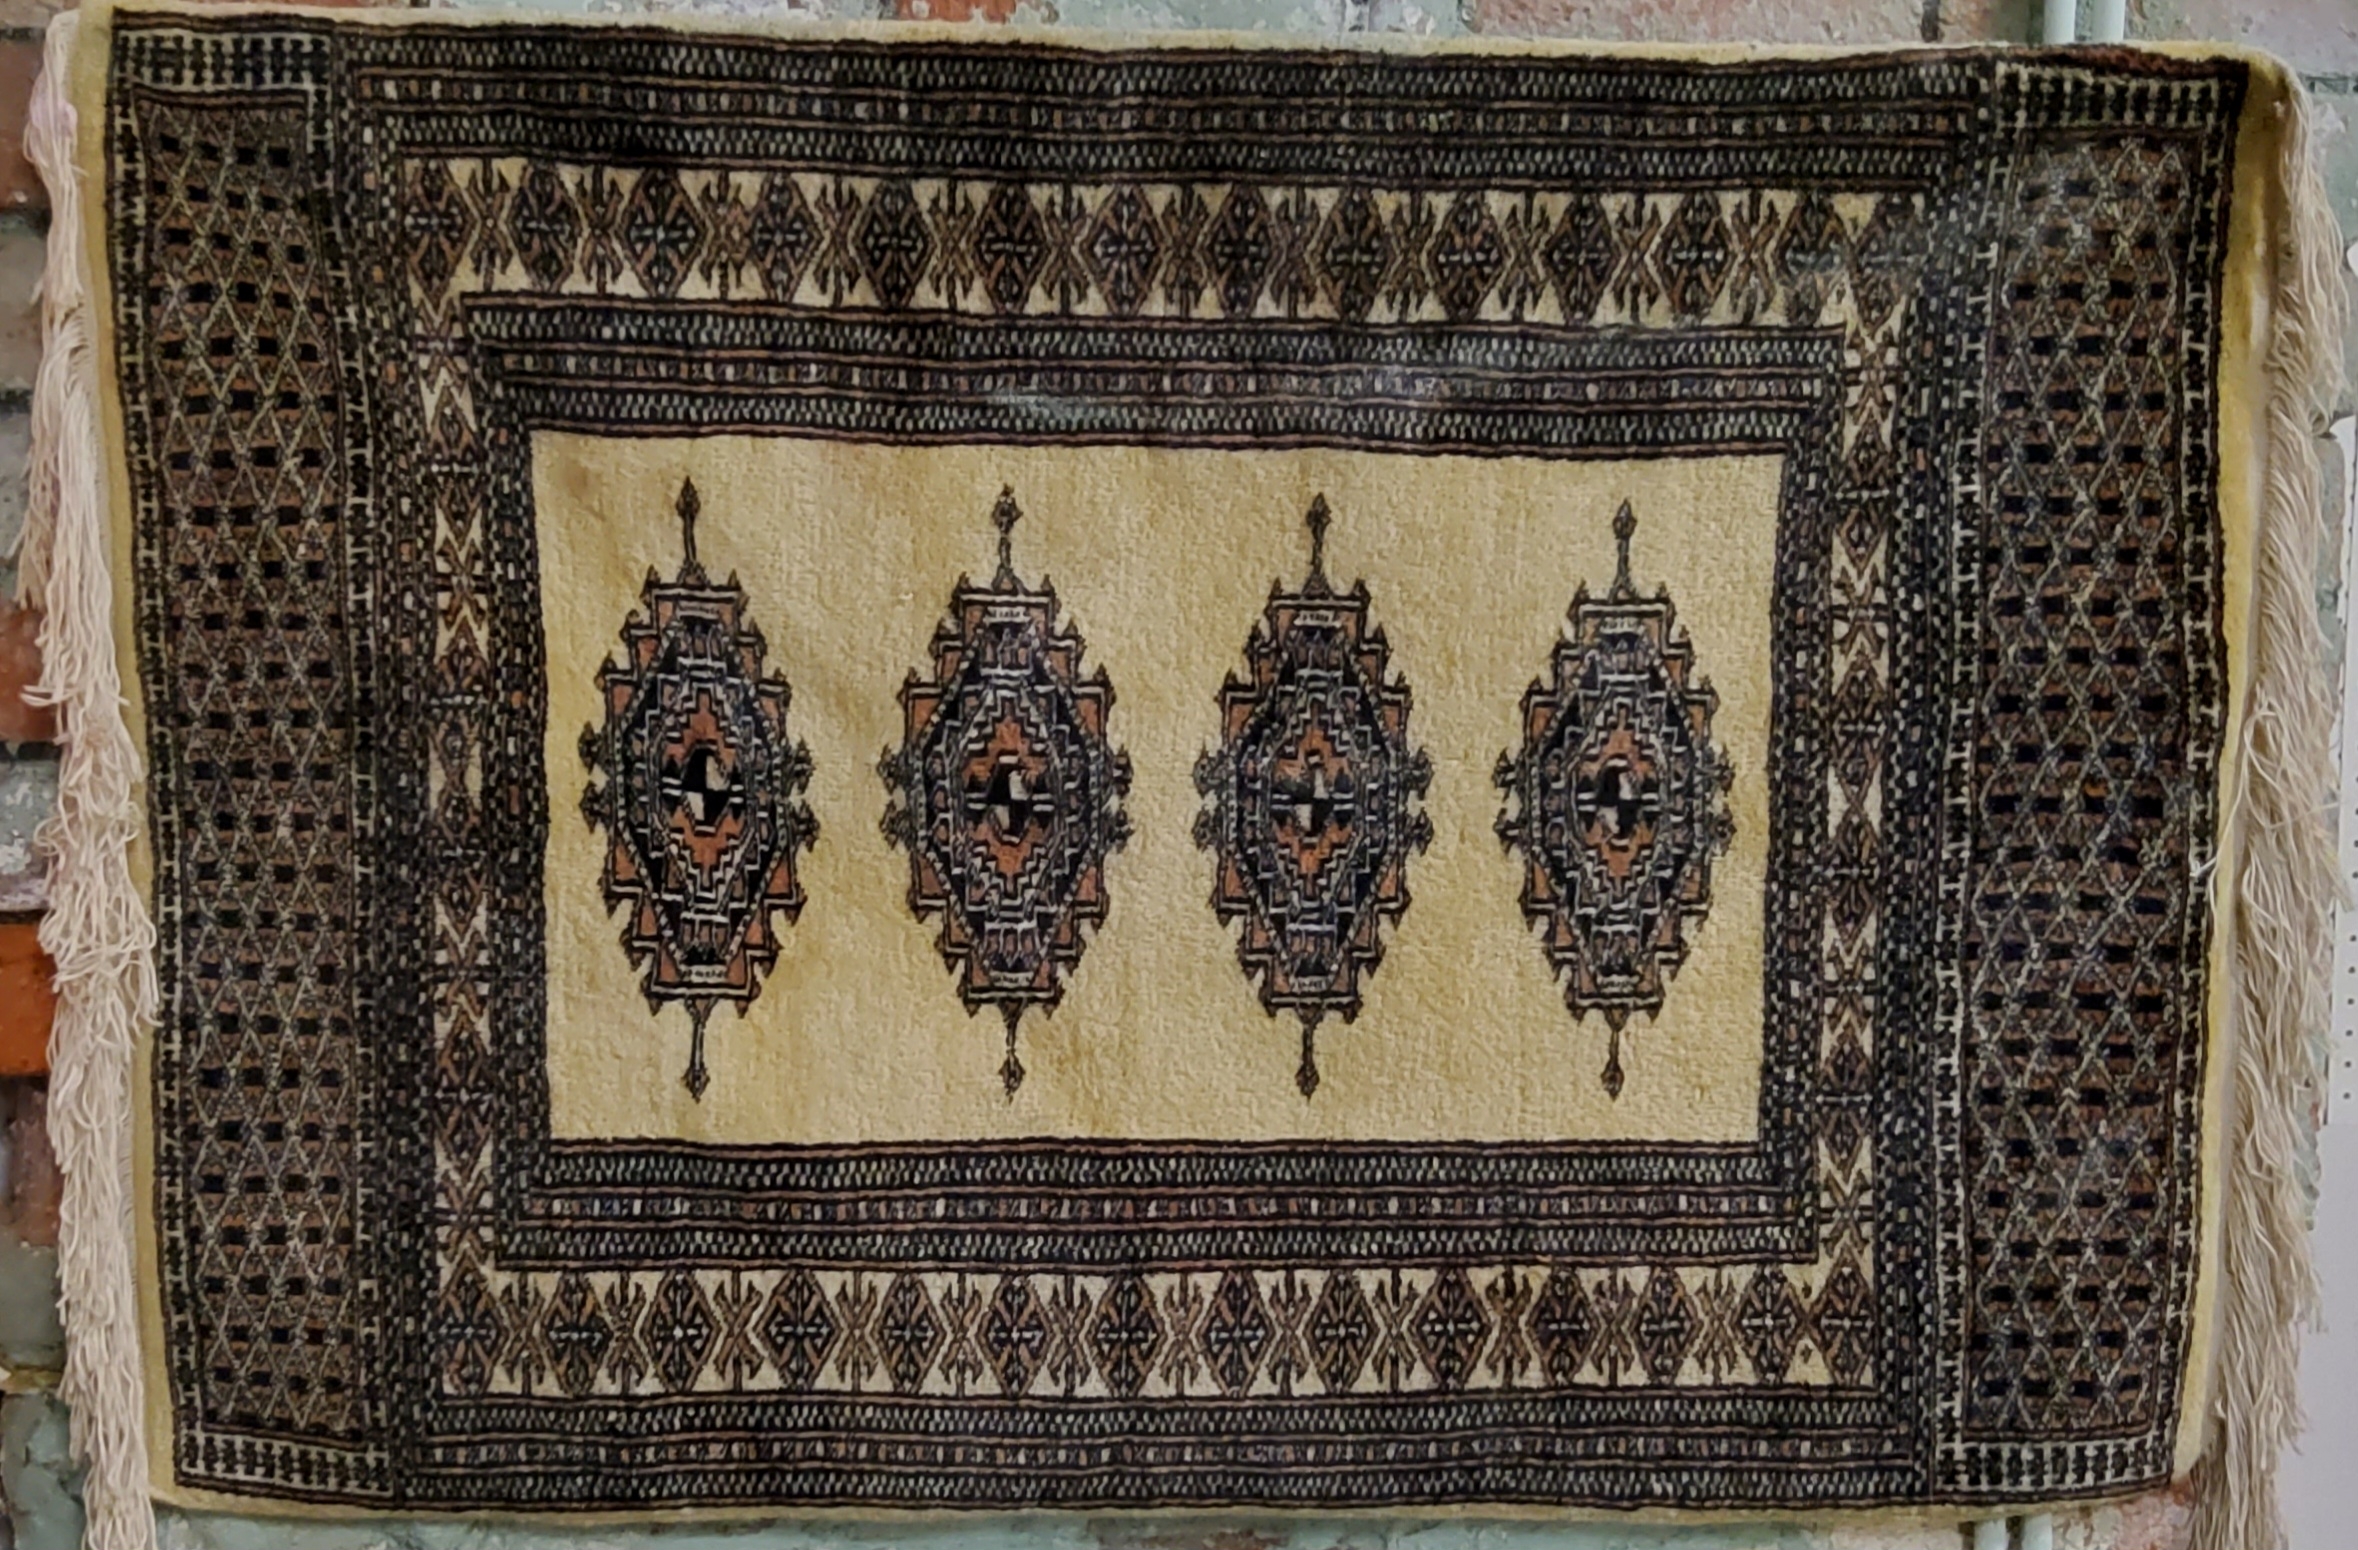 A Pakistani Bokhara rug in vivid tones of gold, black and light brown